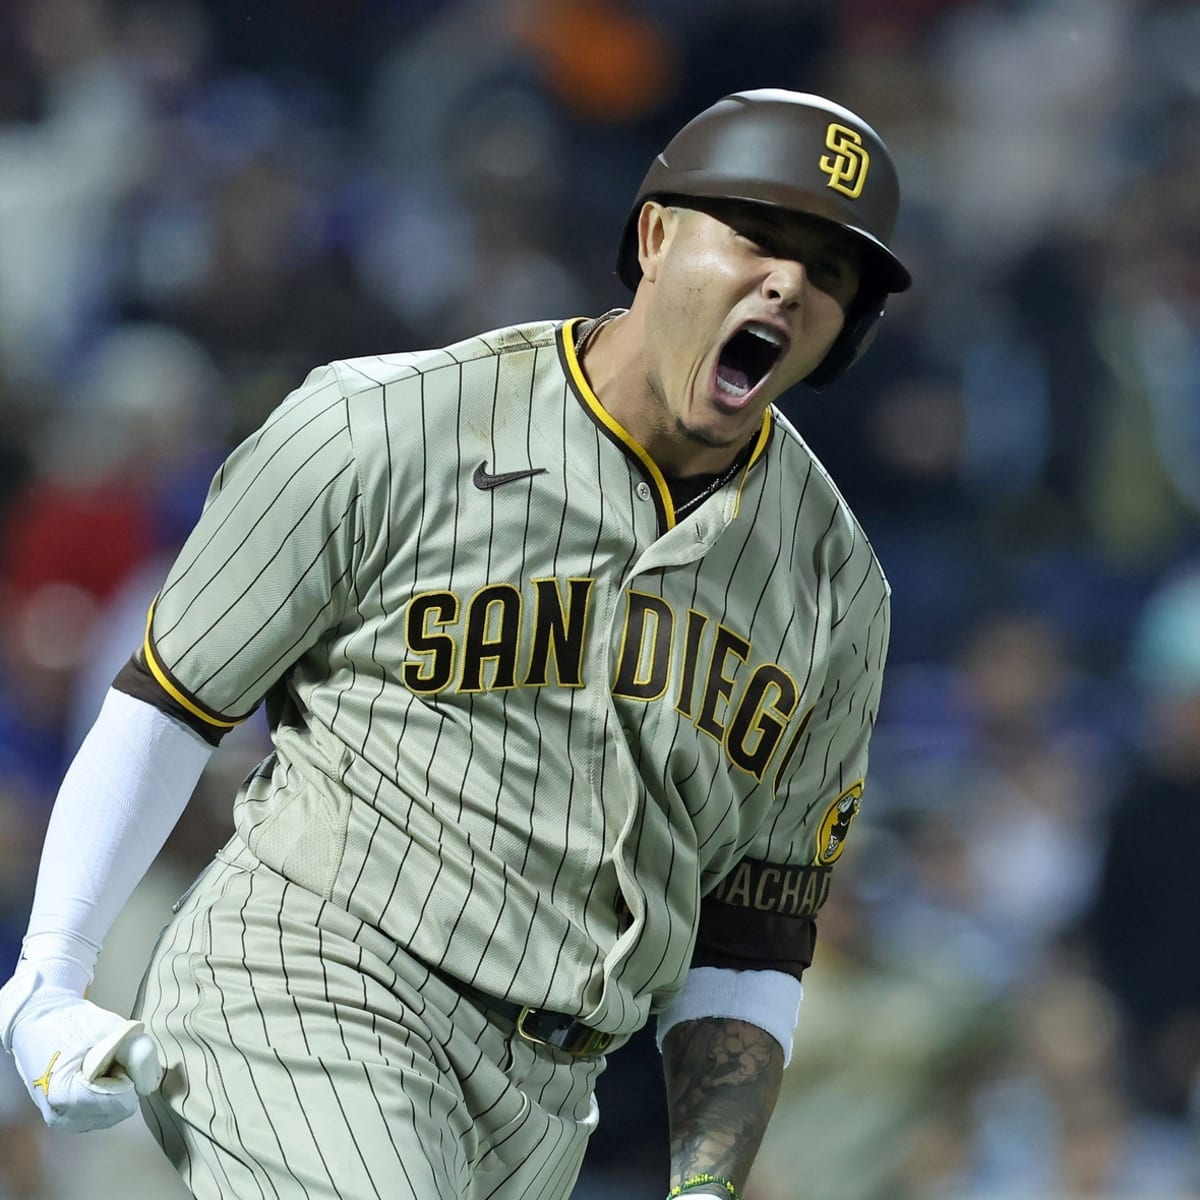 San Diego Padres Advance to NLDS, Win Second Playoff Series Since